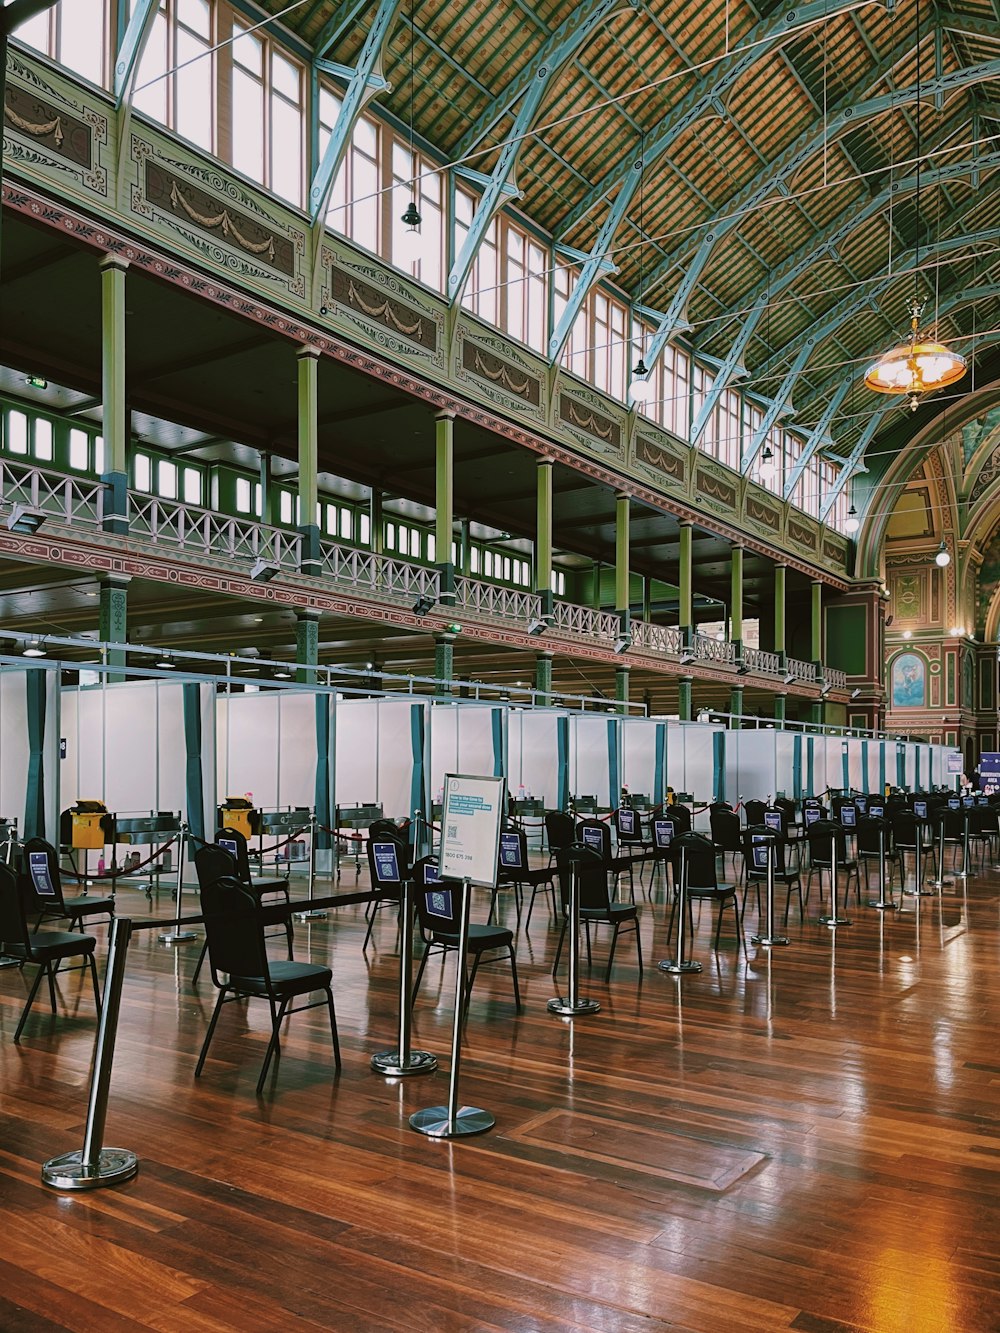 a long row of chairs in a large room